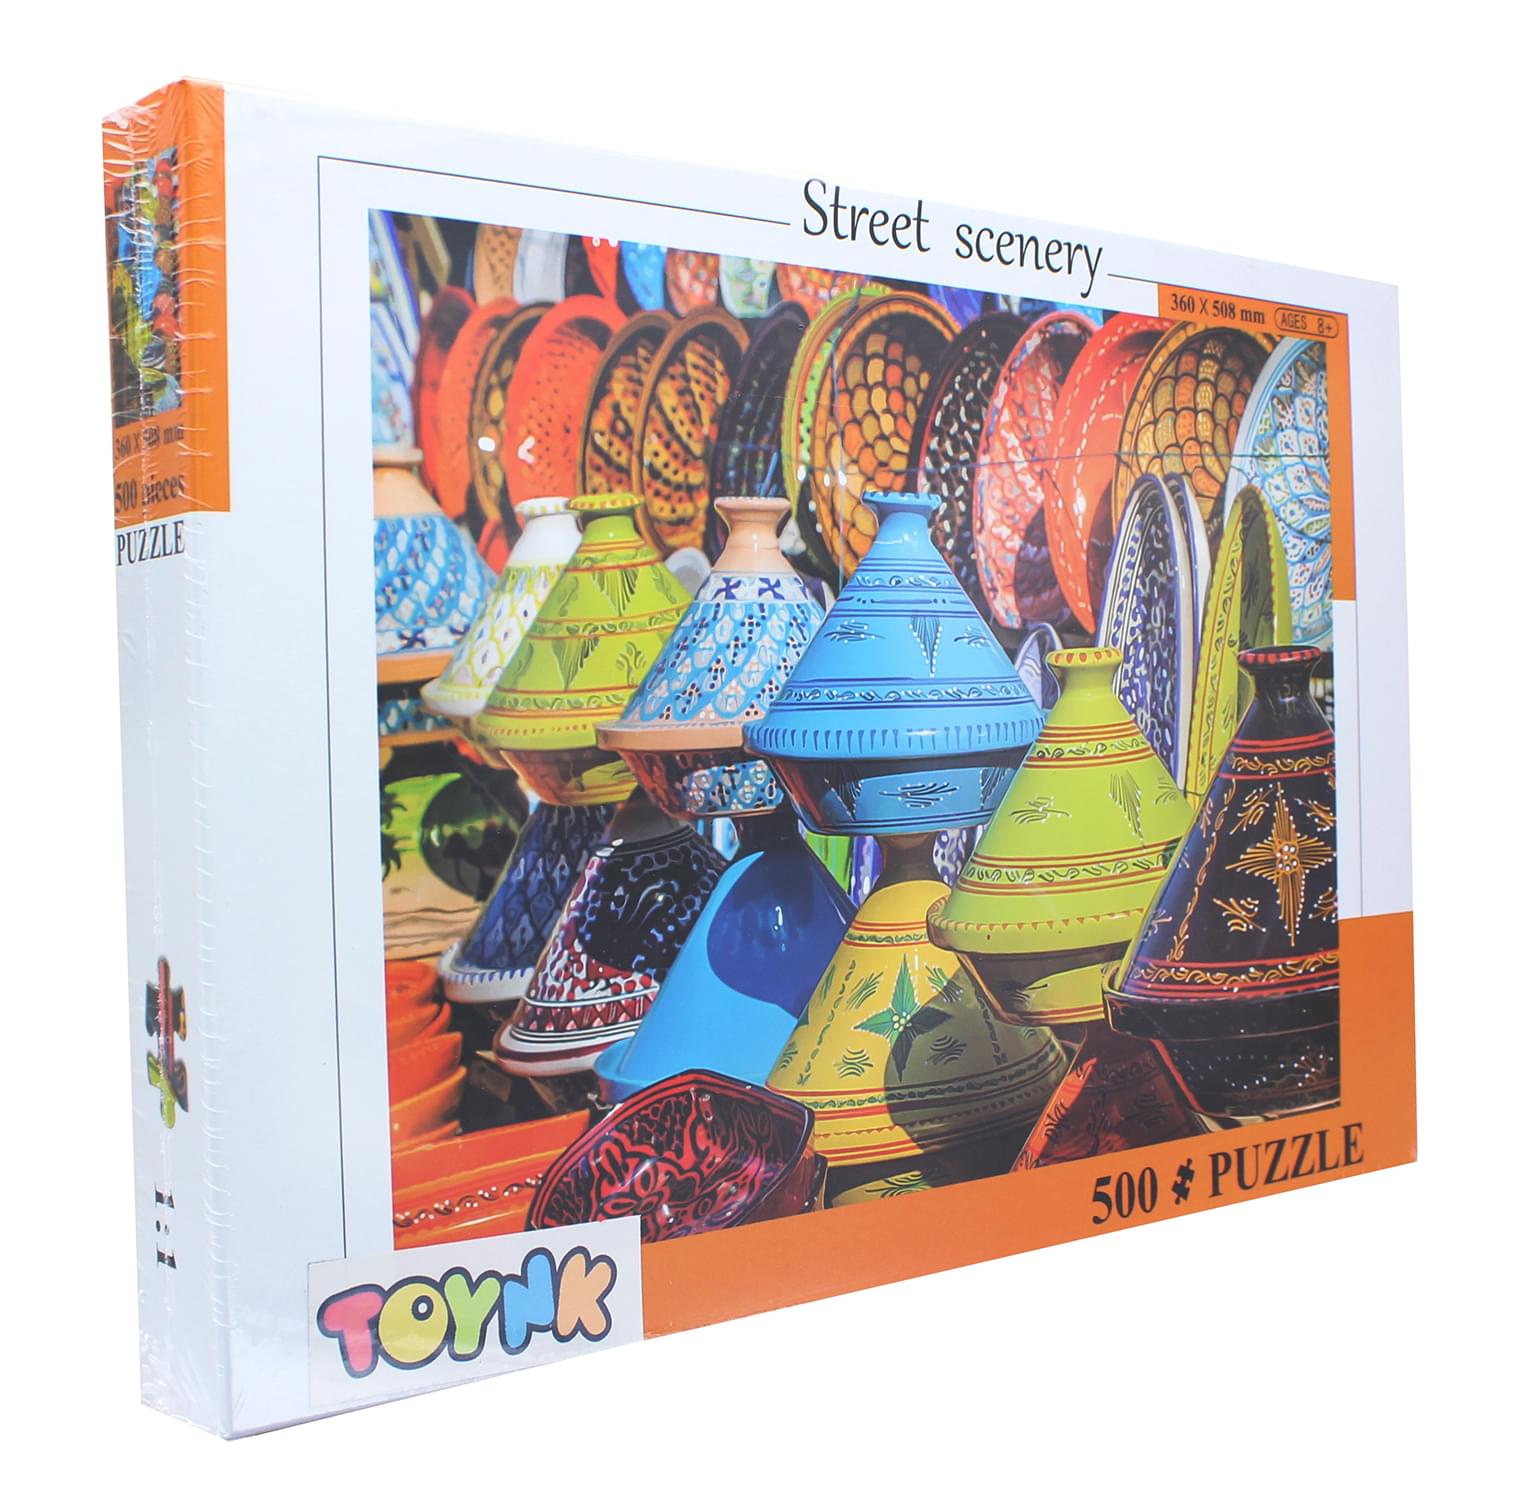 Street Scenery Colorful Pottery 500 Piece Jigsaw Puzzle